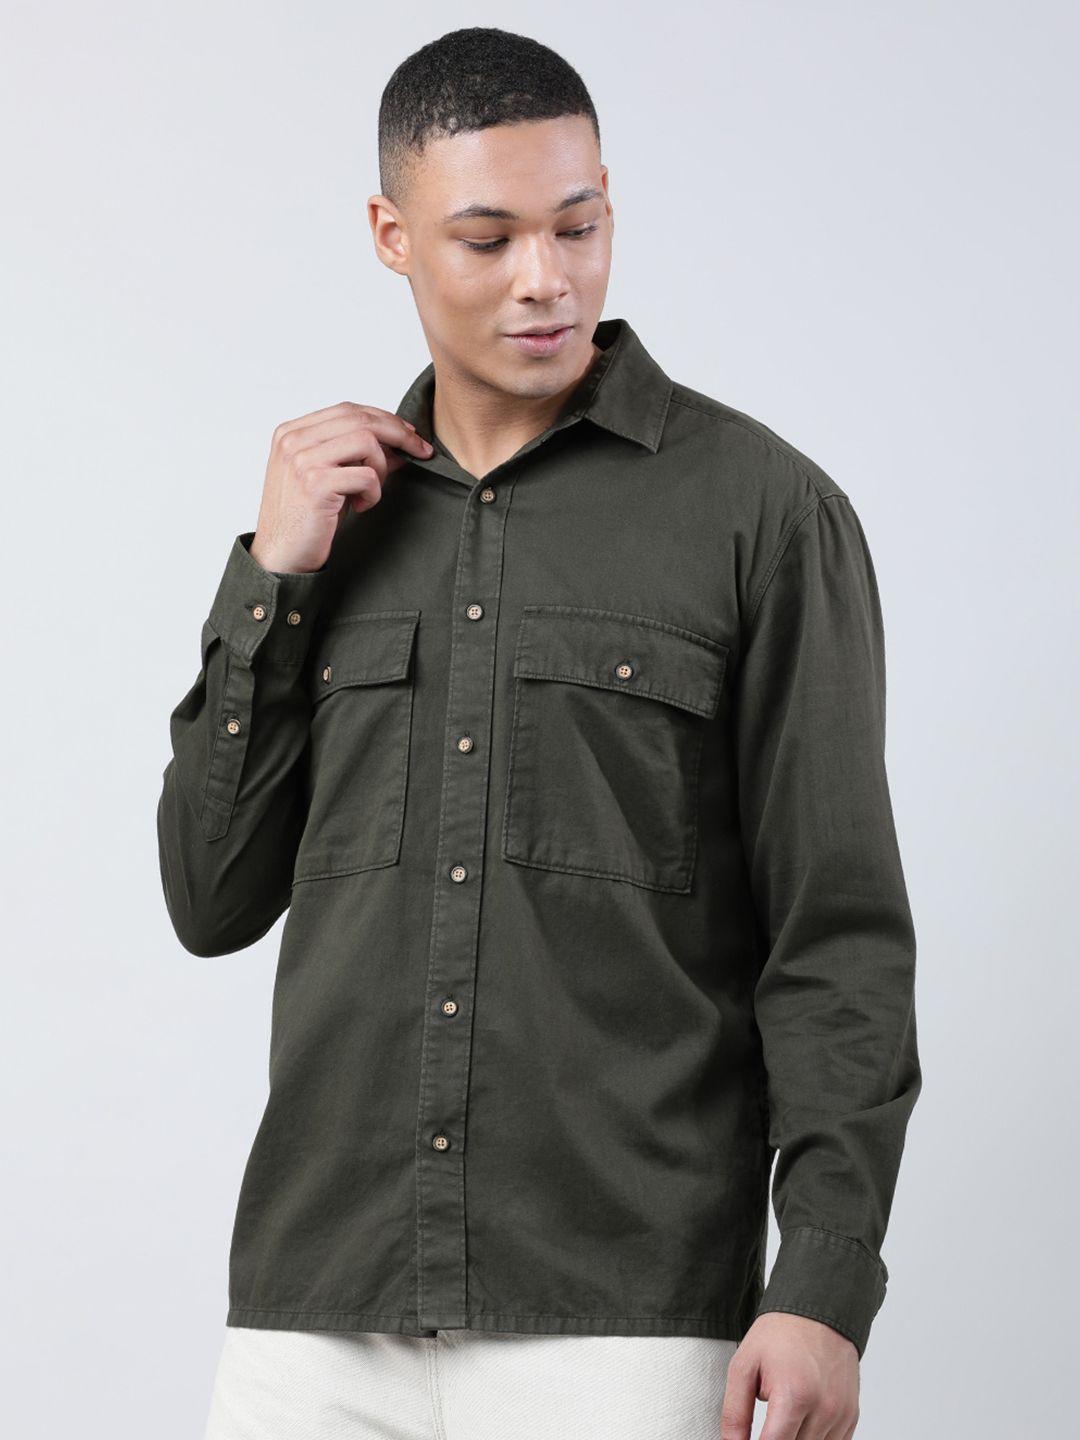 bene kleed relaxed spread collar long sleeves casual shirt